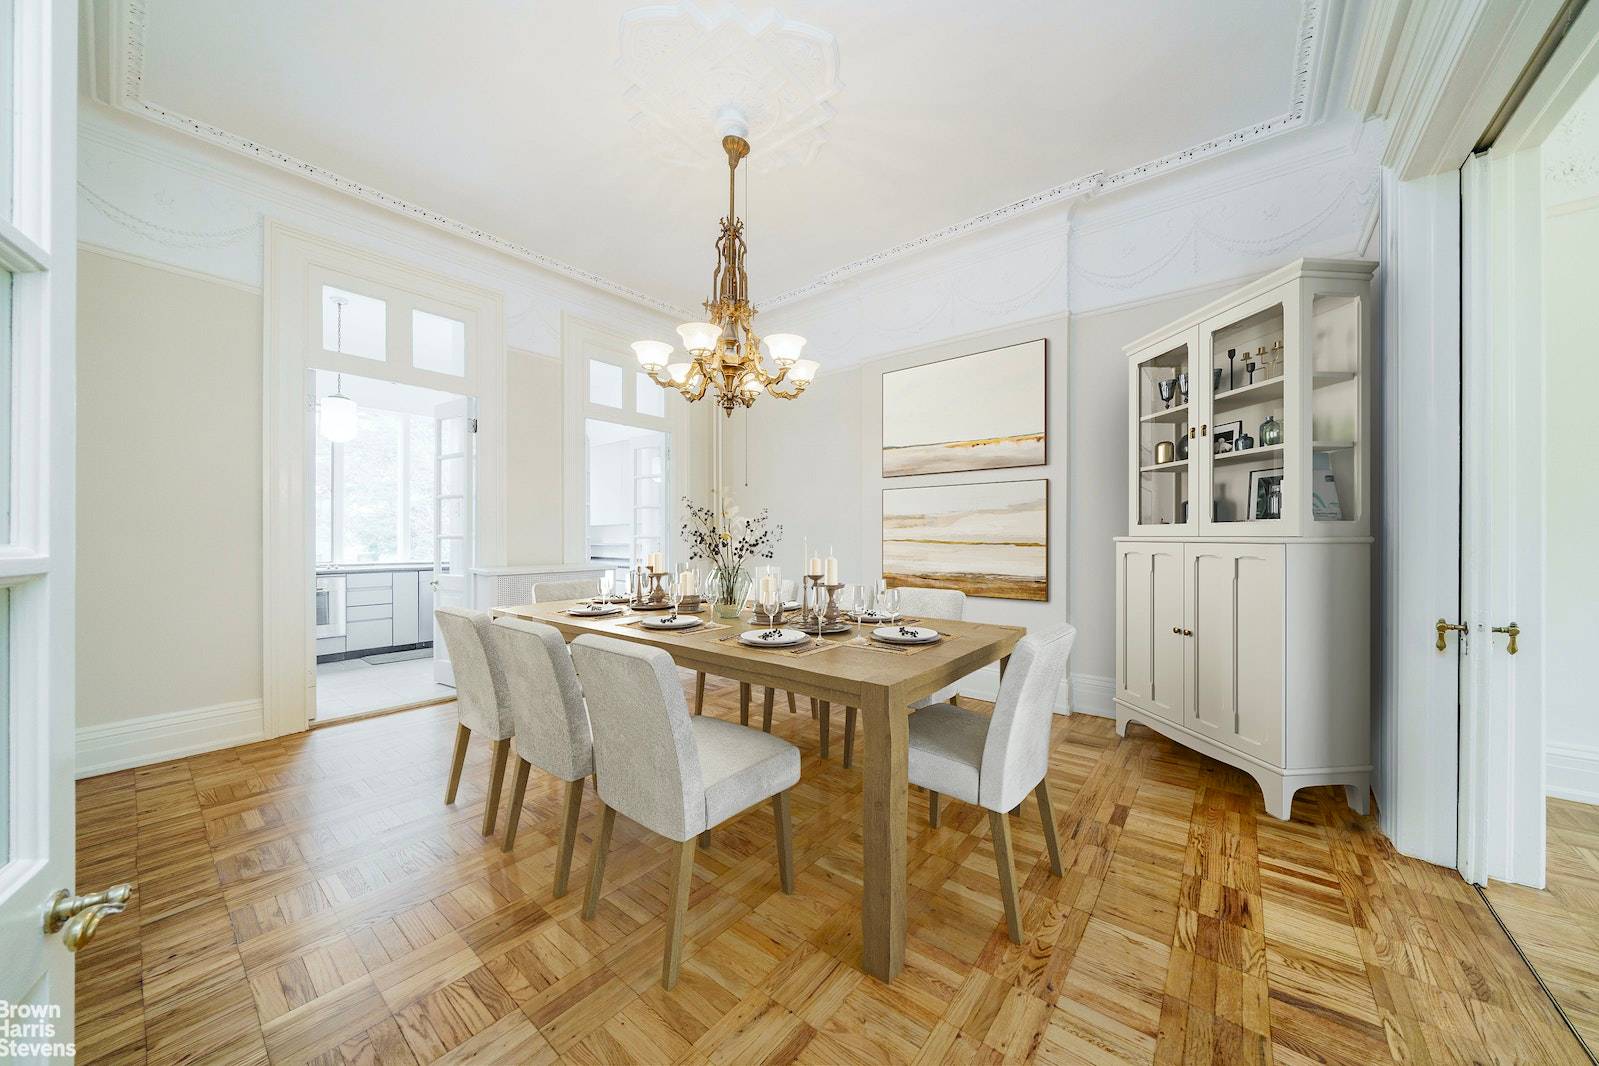 Prime Cobble Hill unveils a coveted, 25' wide, Landmark townhouse with stunning triplex rental which could easily become the most beautiful home you will ever live in.